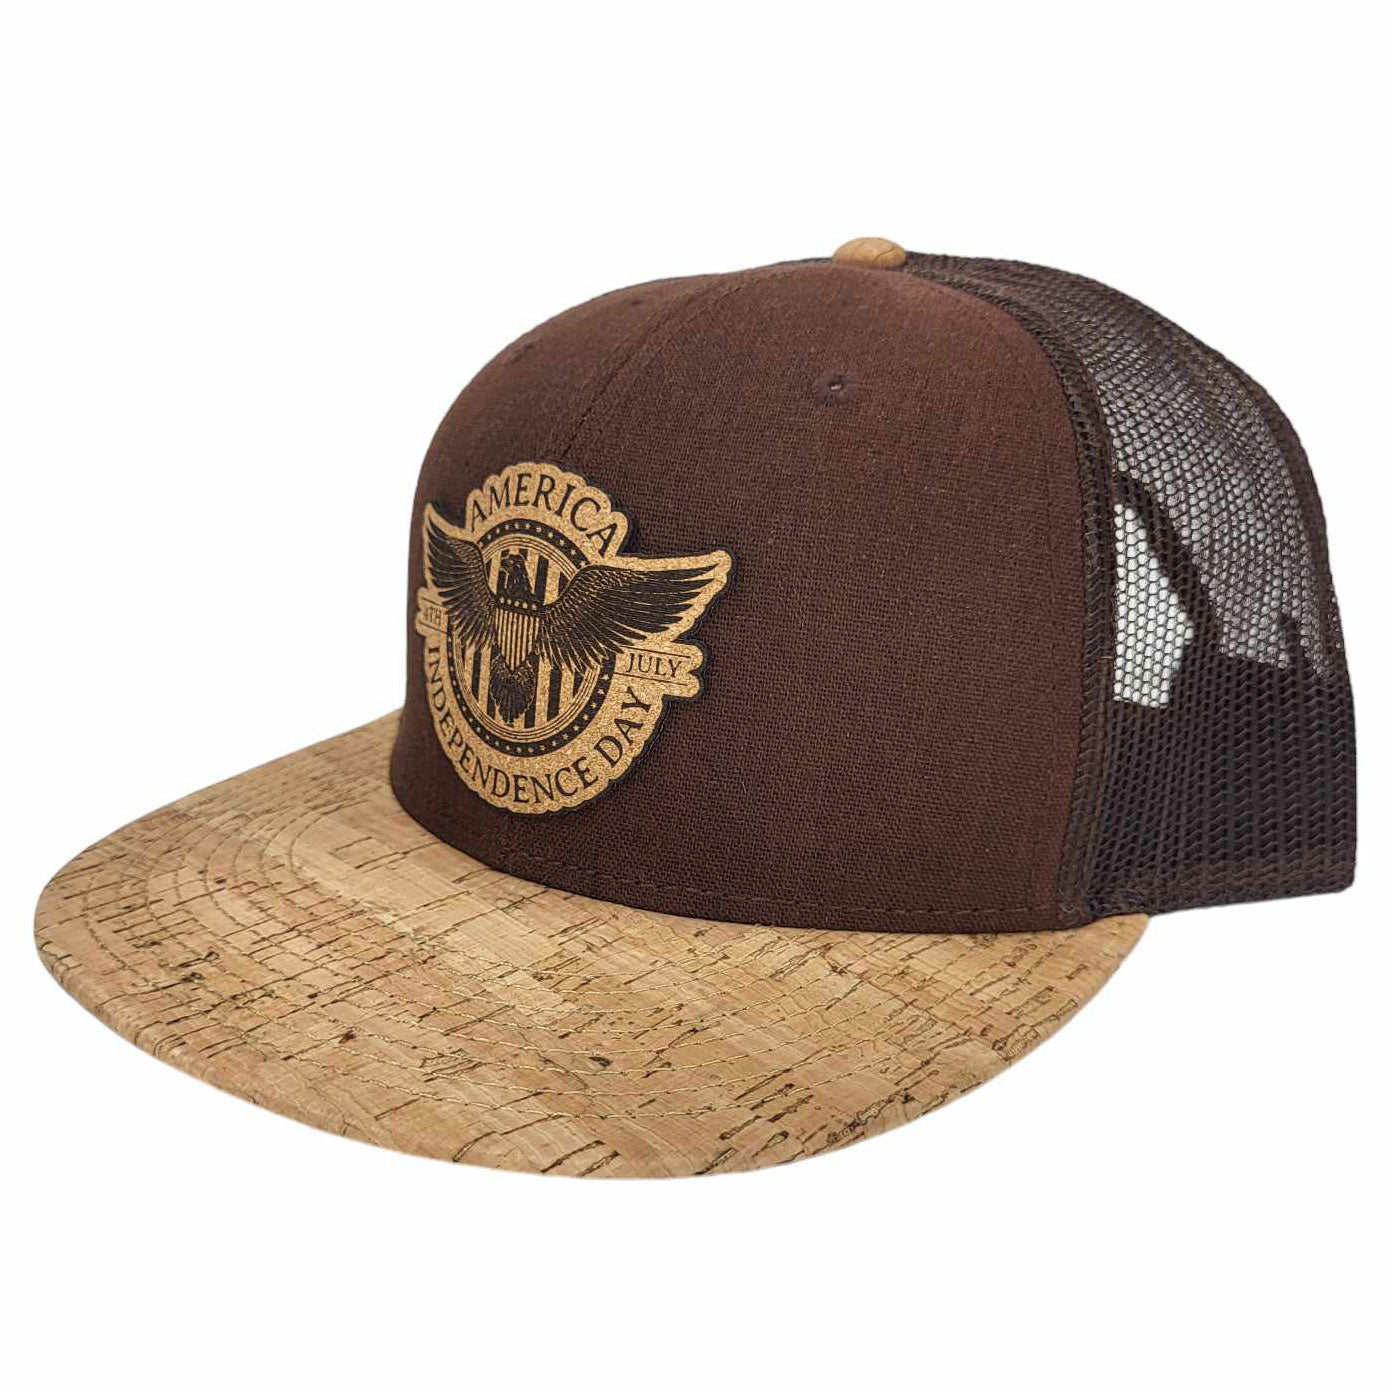 The Independence Day Cork Hat